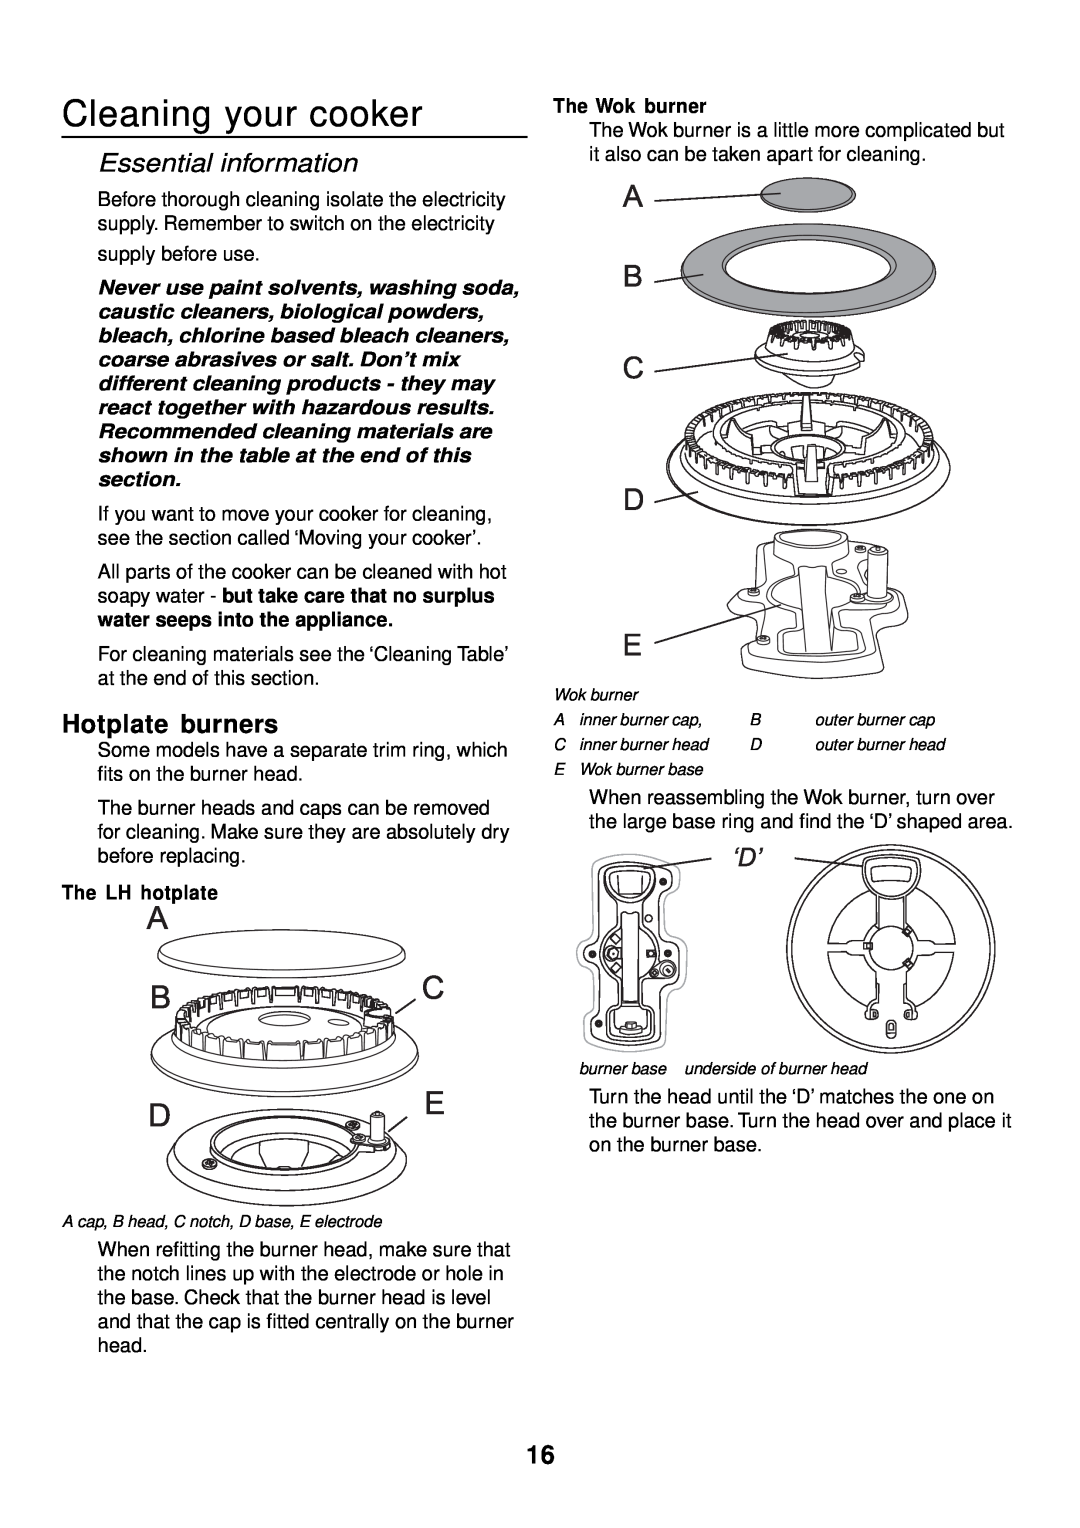 Rangemaster 90 Gas manual Cleaning your cooker, Hotplate burners, Essential information 